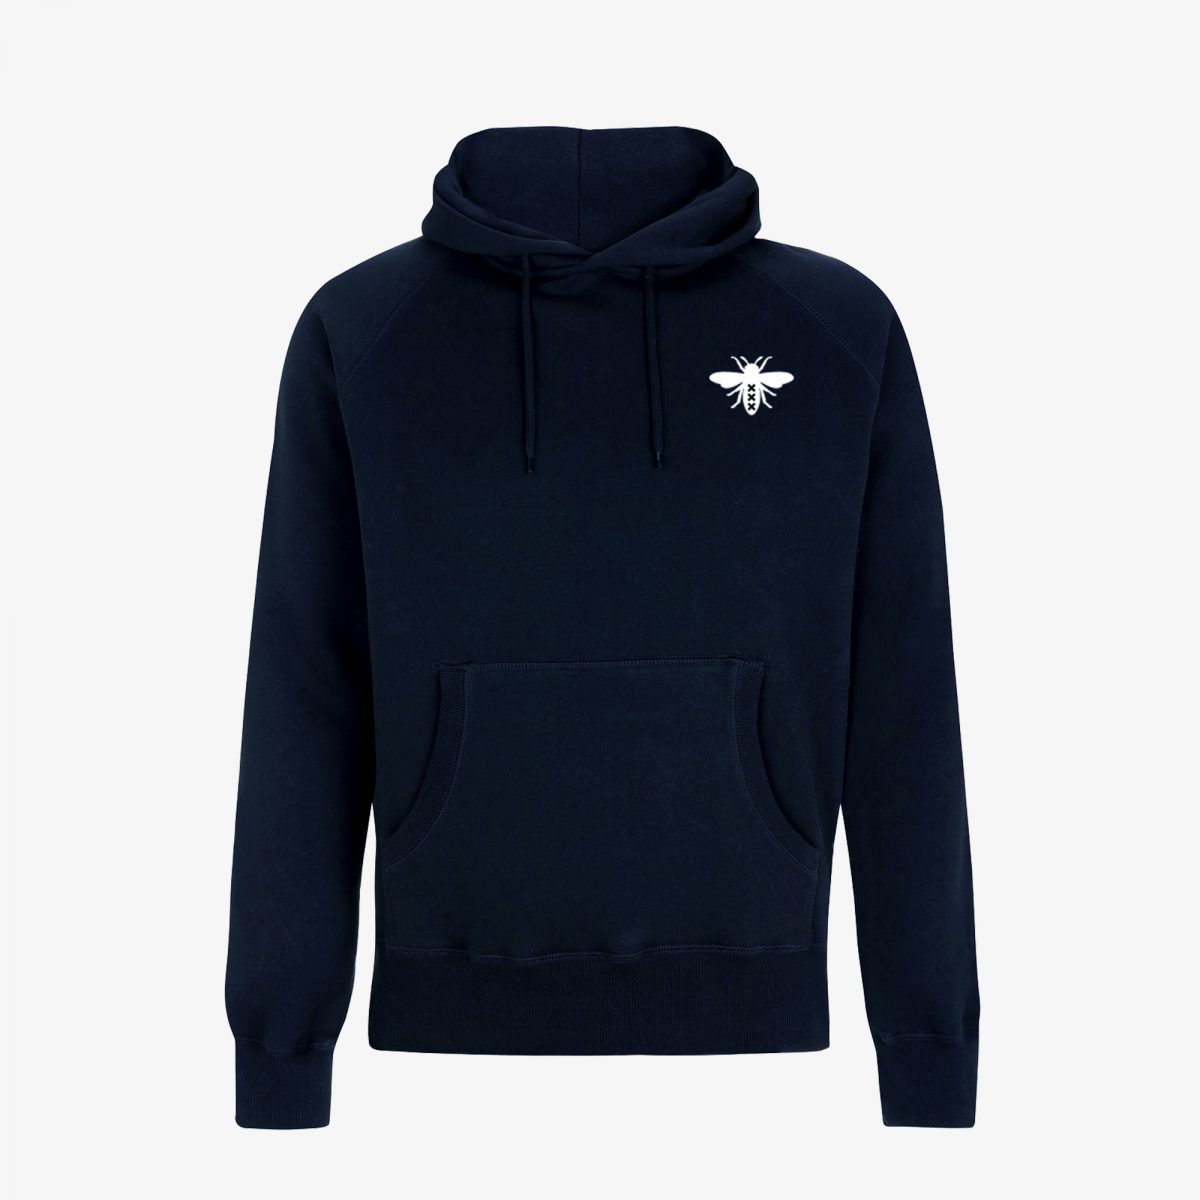 Classic-Navy-Blue-Hoodie-Front-Grey-Background